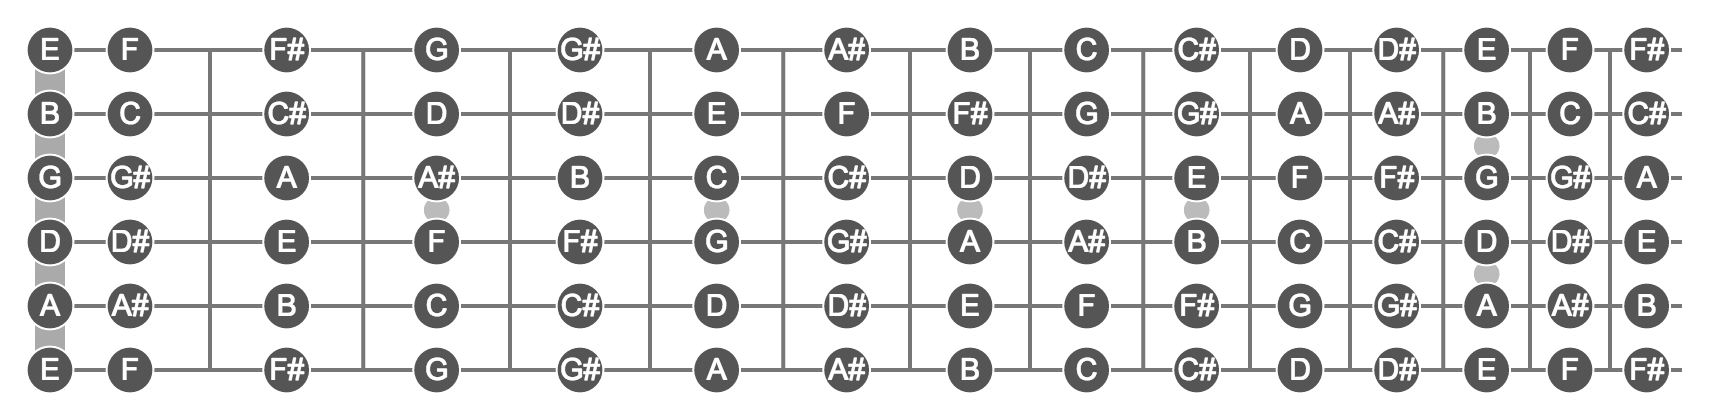 Notes On A Fretboard Chart